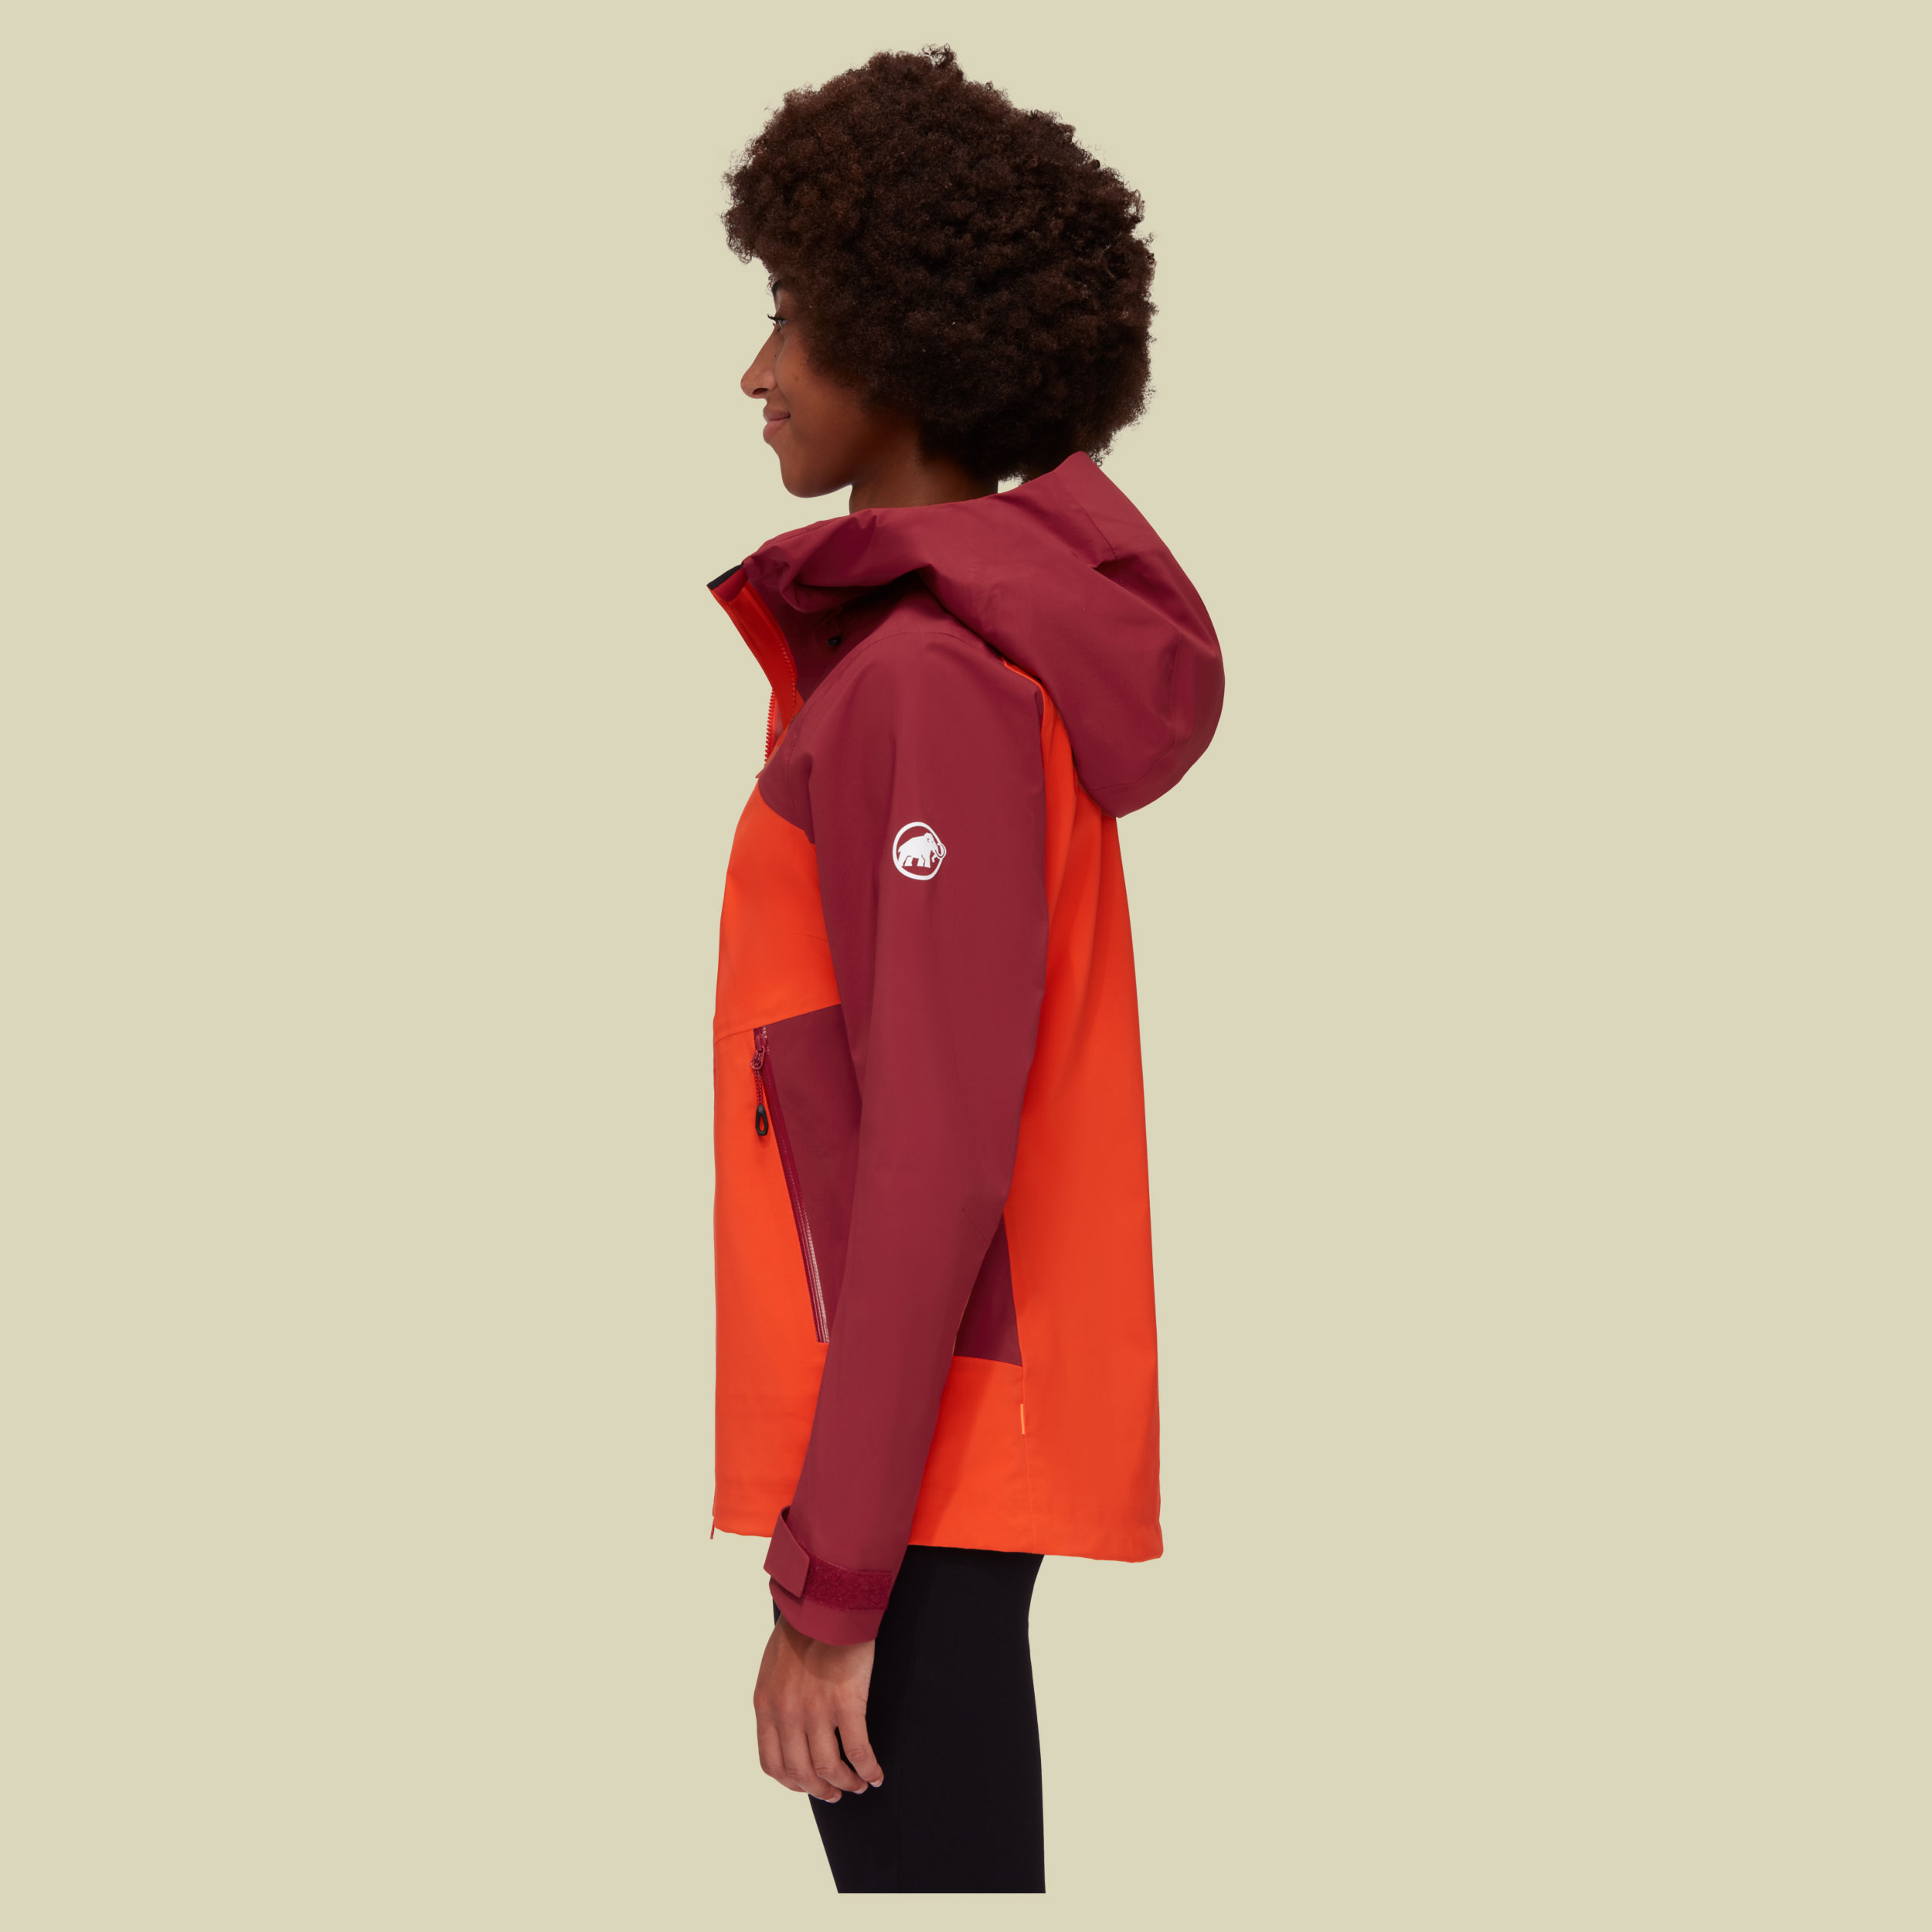 Alto Guide HS Hooded Jacket Women Größe L  Farbe hot red-blood red